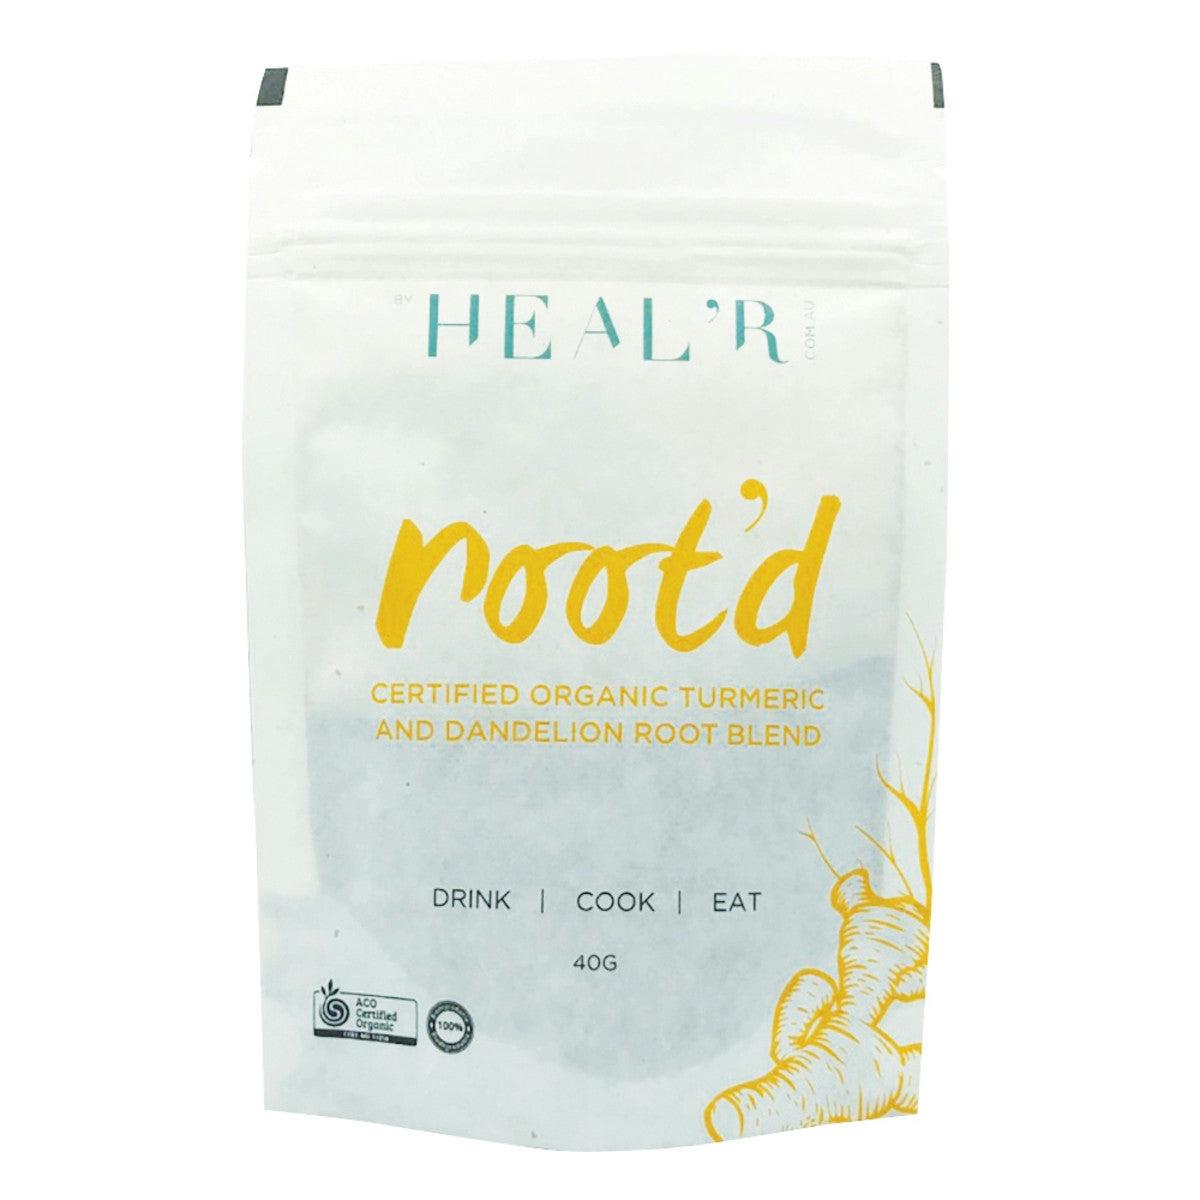 image of Heal'r Root'd (Organic Turmeric Spice Blend with Dandelion Root) 40g on white background 